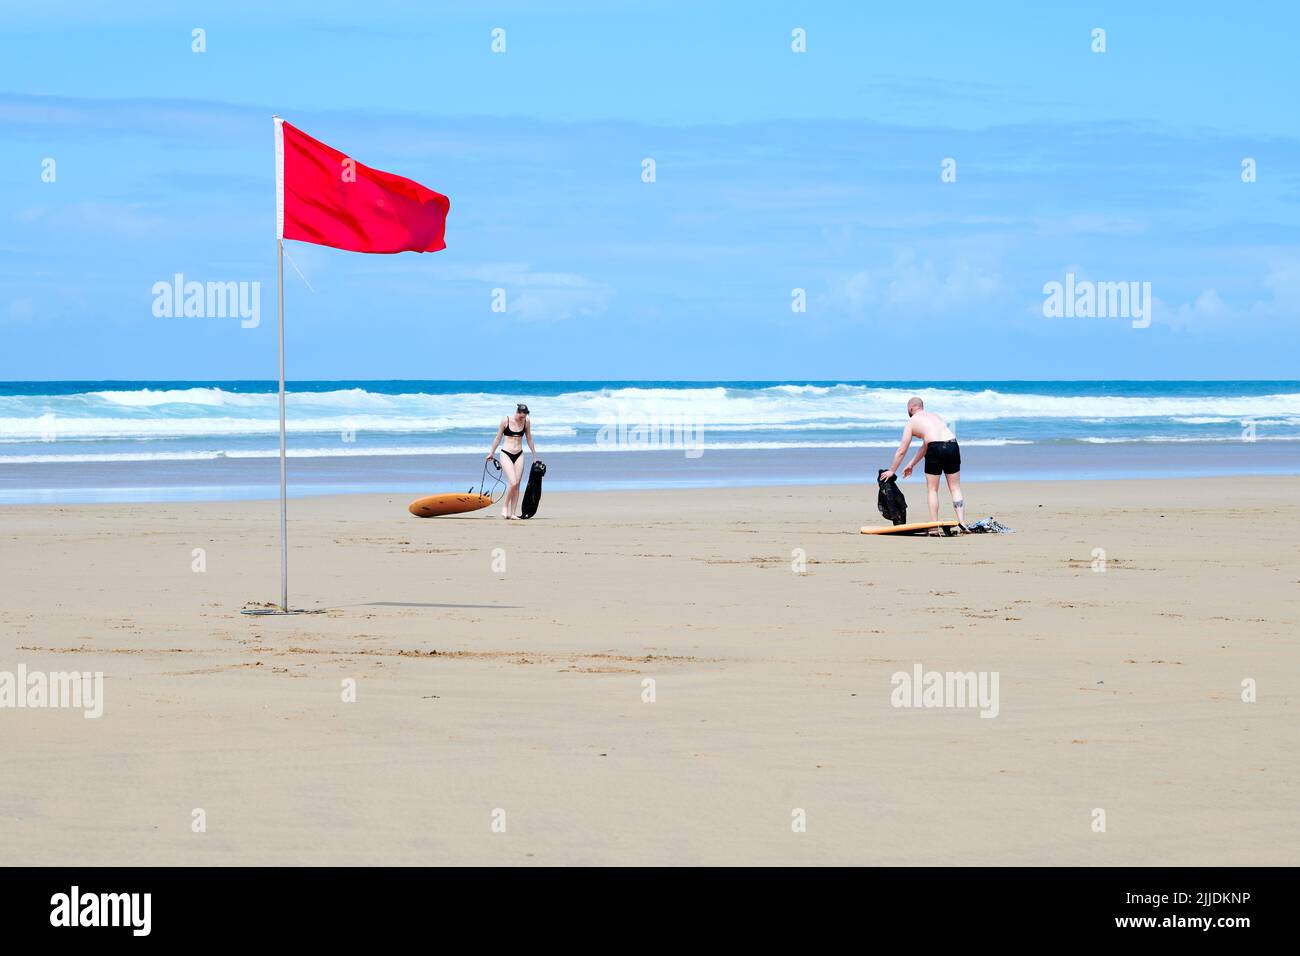 Red flag on the shore as surfing is cancelled due to treacherous wave conditions at Mawgan Porth beach, Cornwall, England. Stock Photo